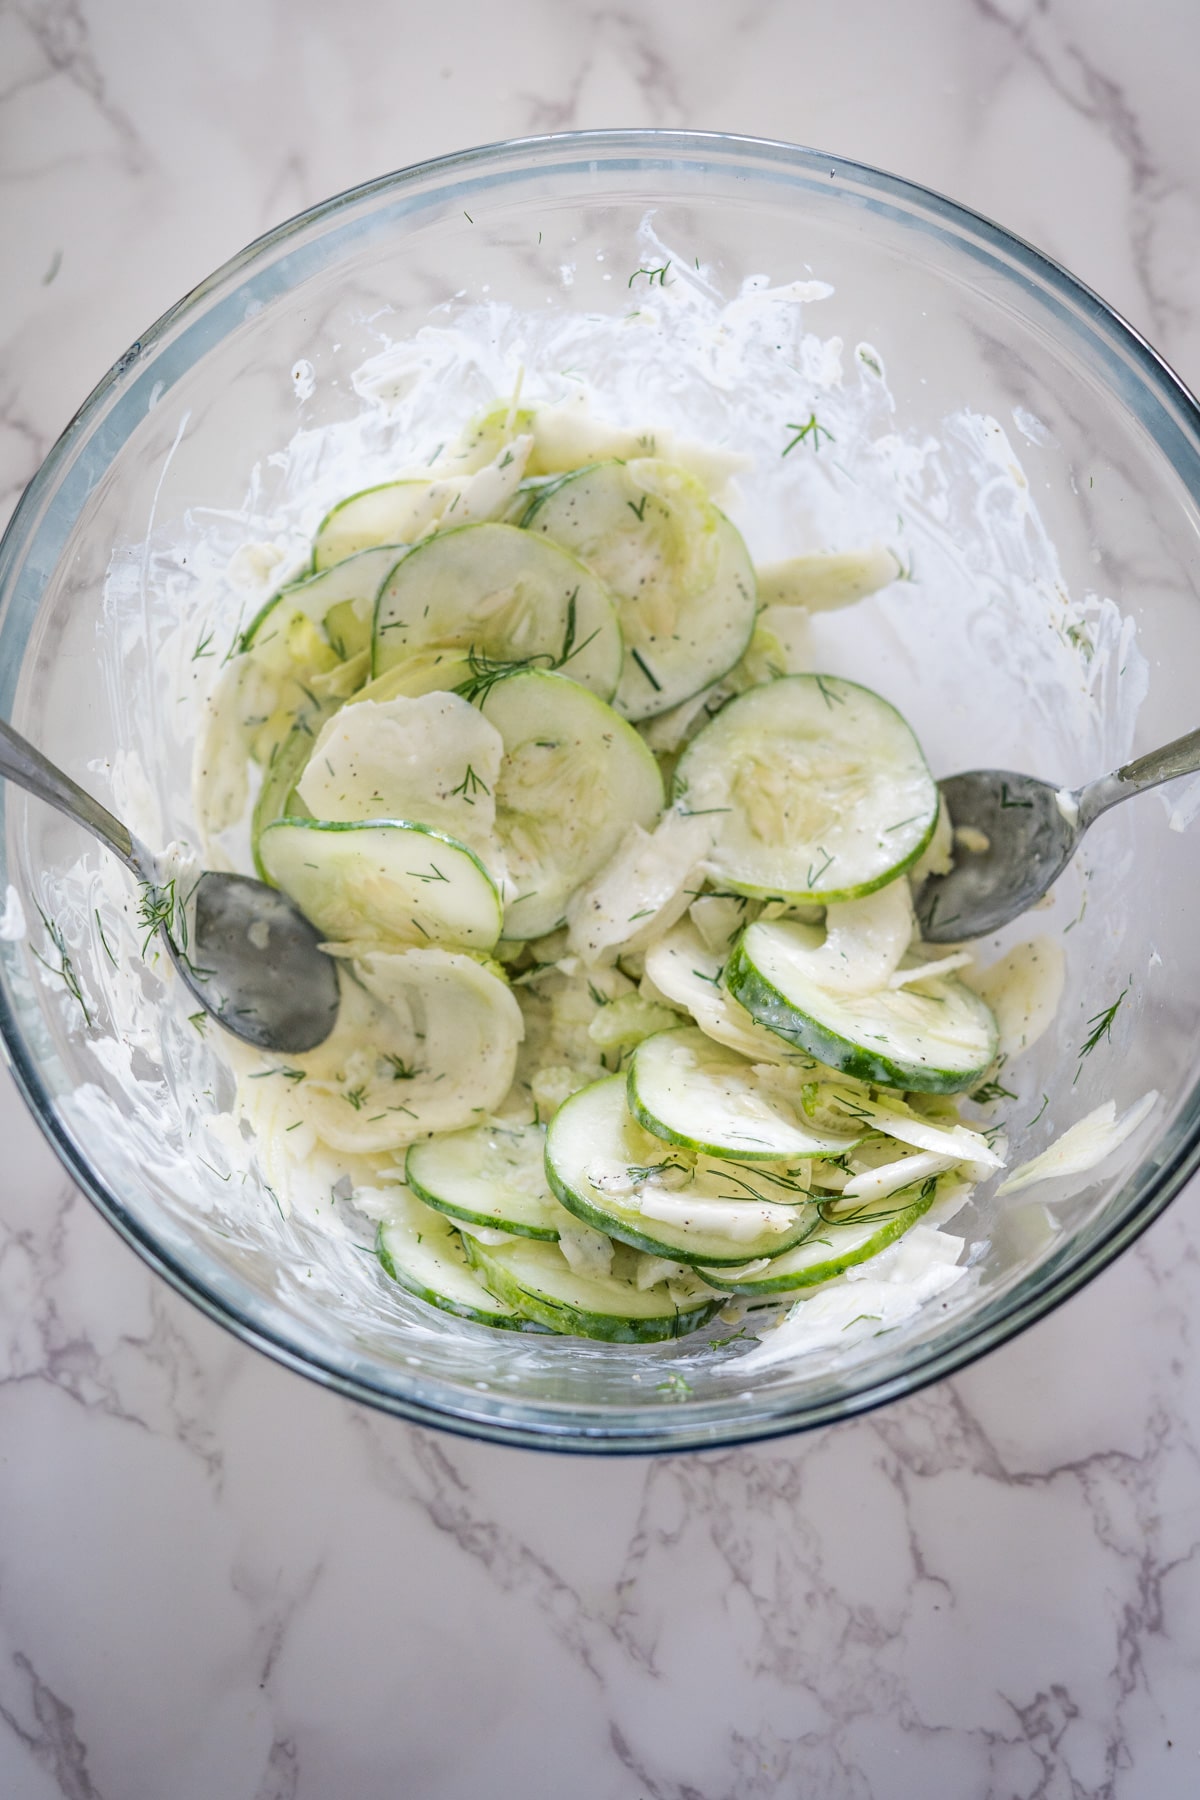 Cucumber and fennel salad in a glass bowl.